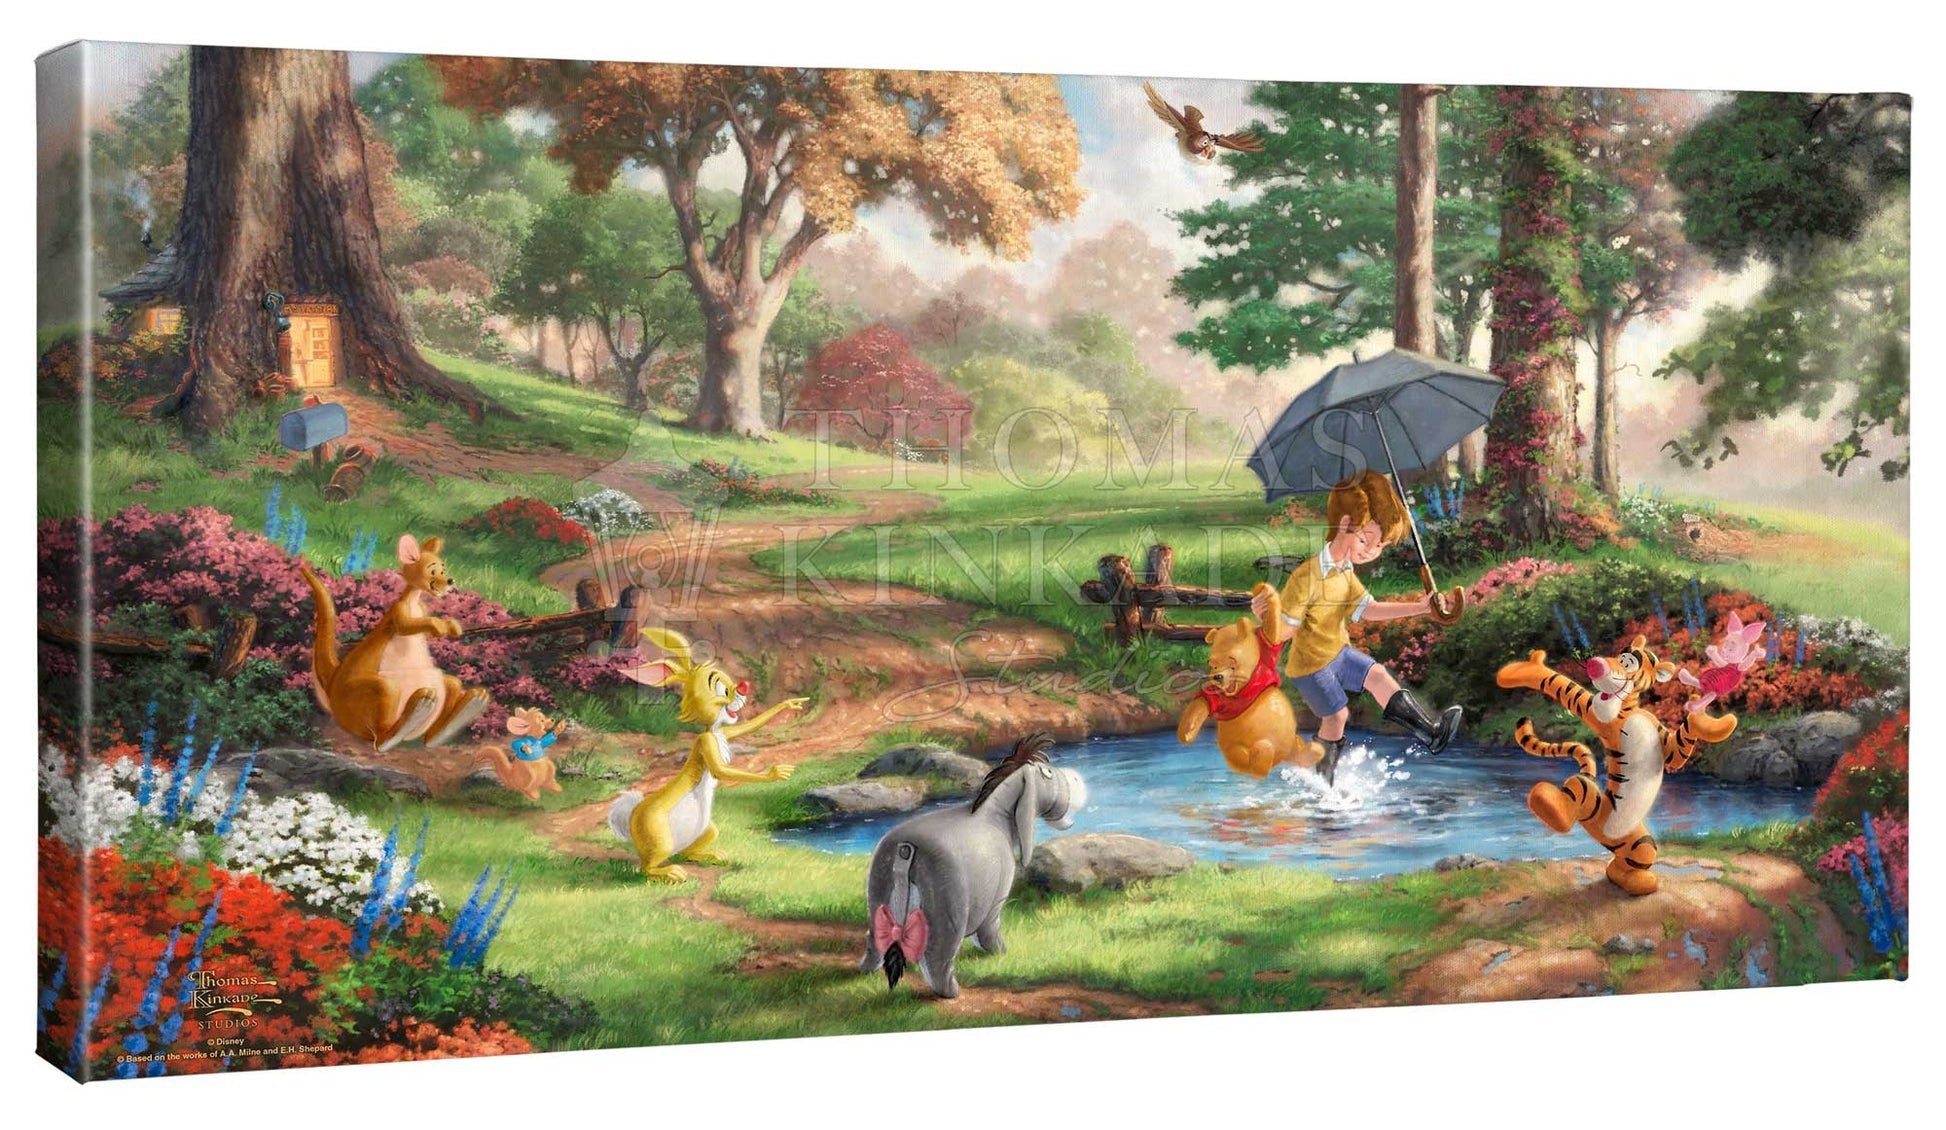 Winnie the Pooh, Christopher Robin, Eeyore, Kanga, Rabbit, Roo, Tigger, another day of fun, with friends, as Christopher and Pooh, play in the creek, kicking and splashing the water around.